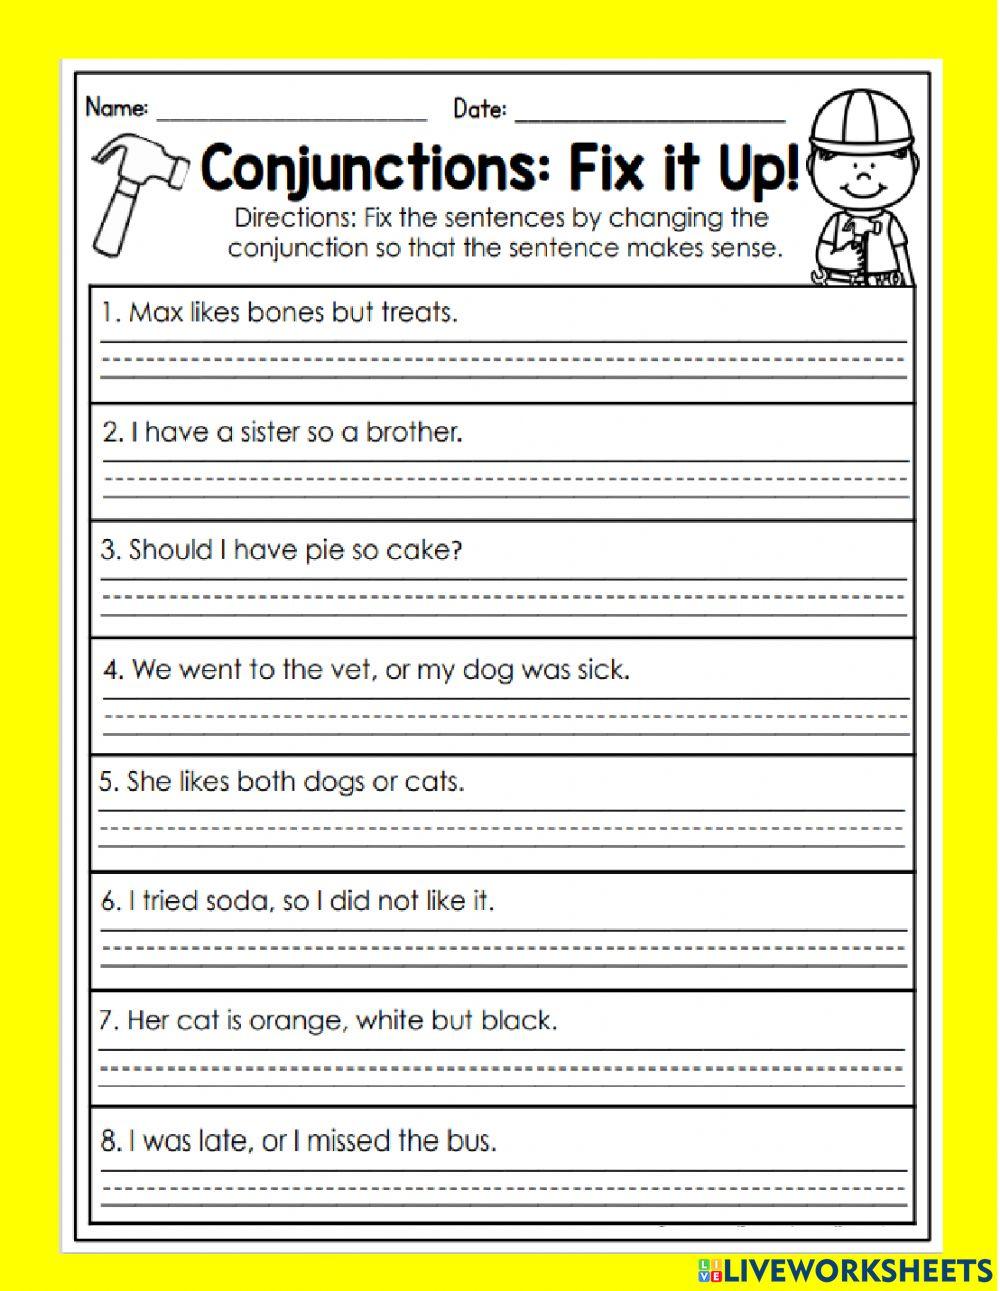 Year 1 - Conjunctions